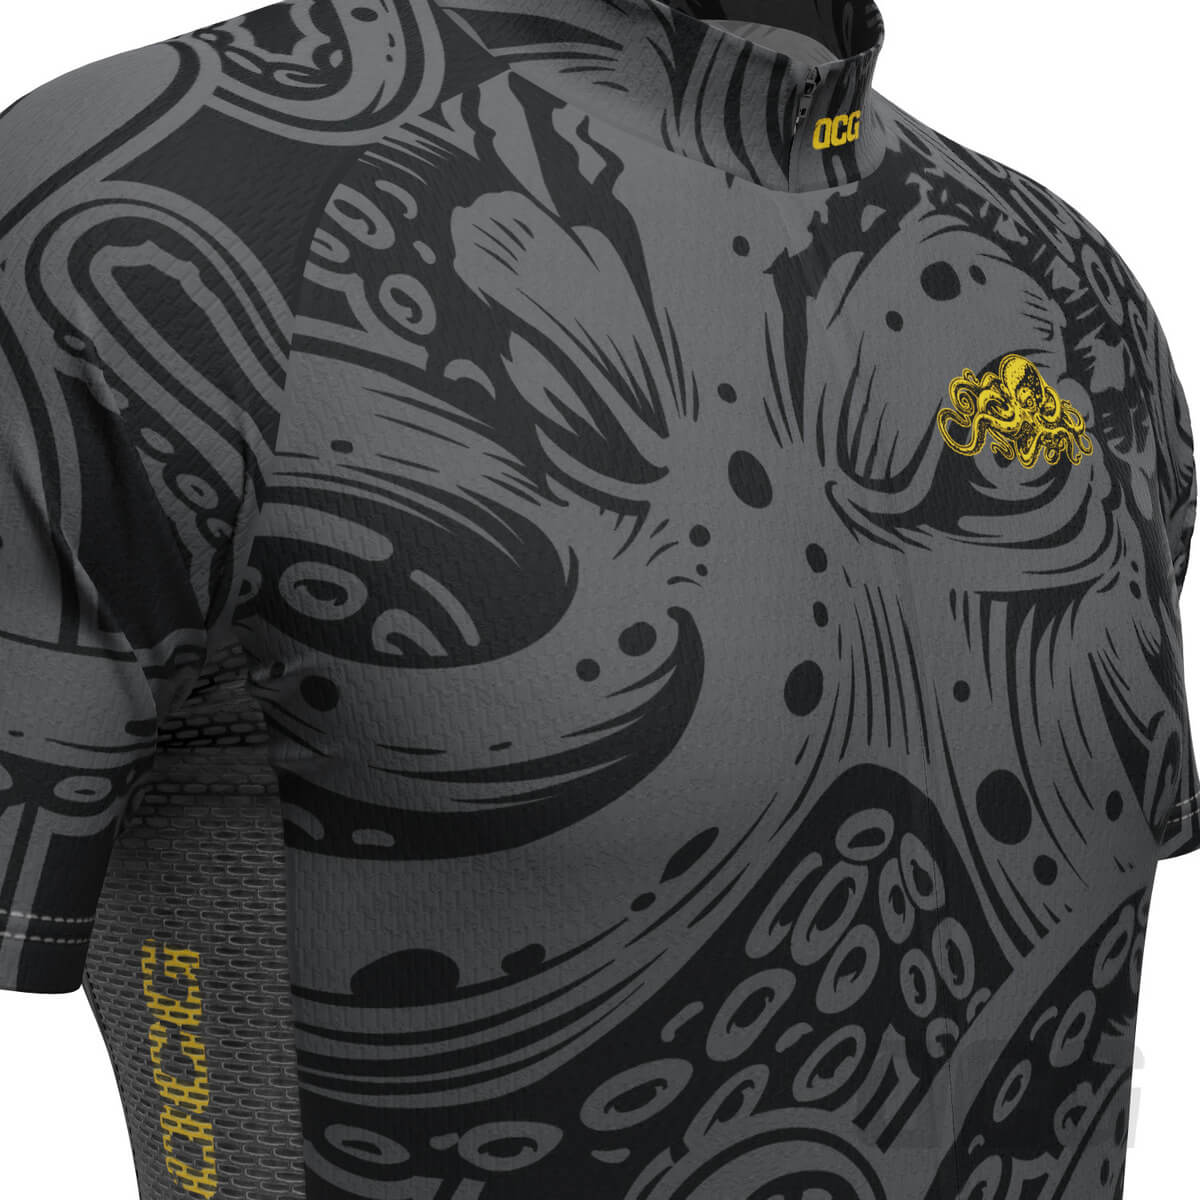 Men's The Black Octopus 2 Piece Cycling Kit